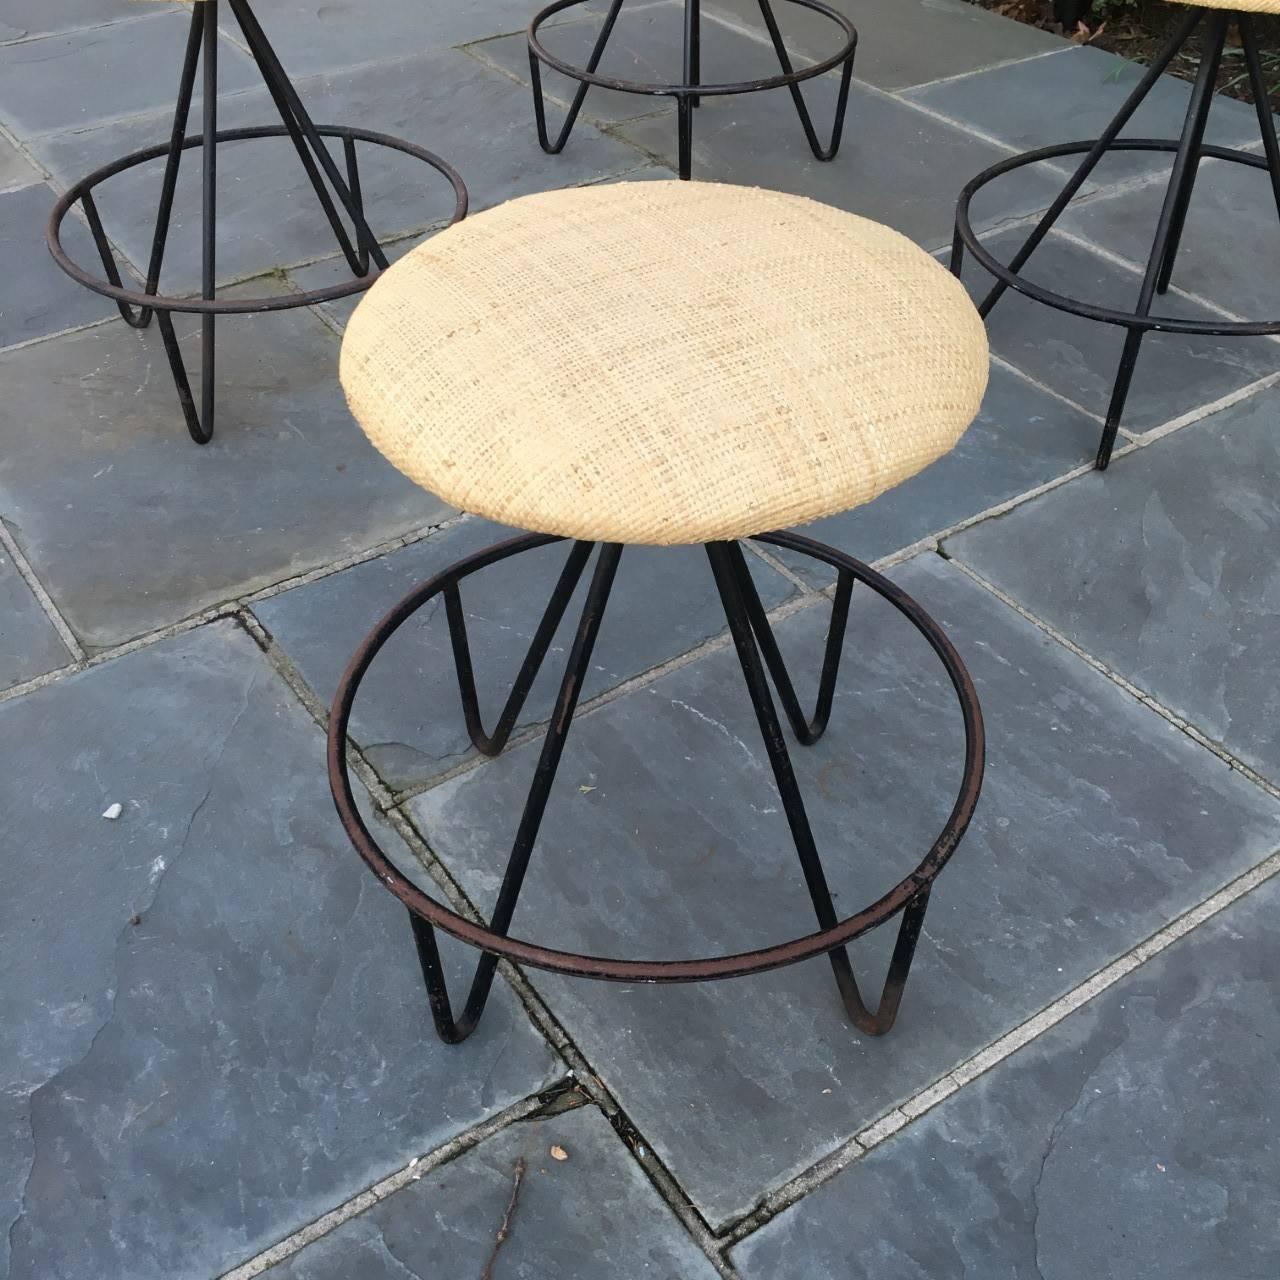 Set of four low iron stools- excellent for a bar counter or work area, USA, 1960s.